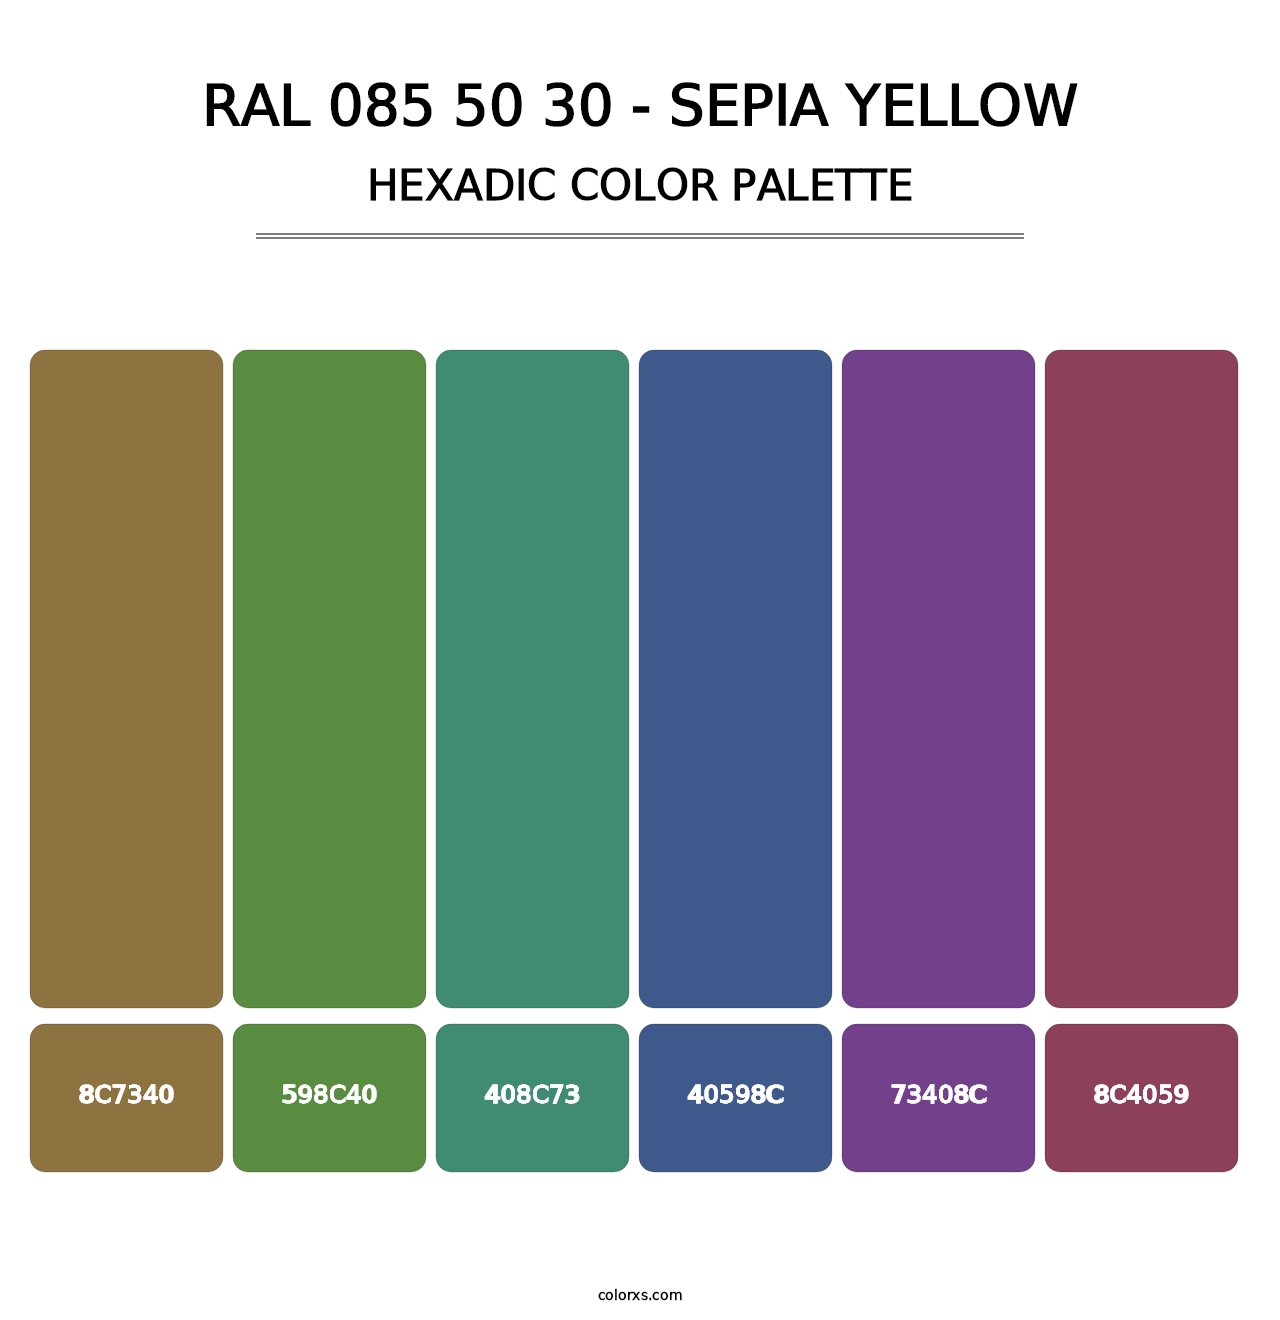 RAL 085 50 30 - Sepia Yellow - Hexadic Color Palette